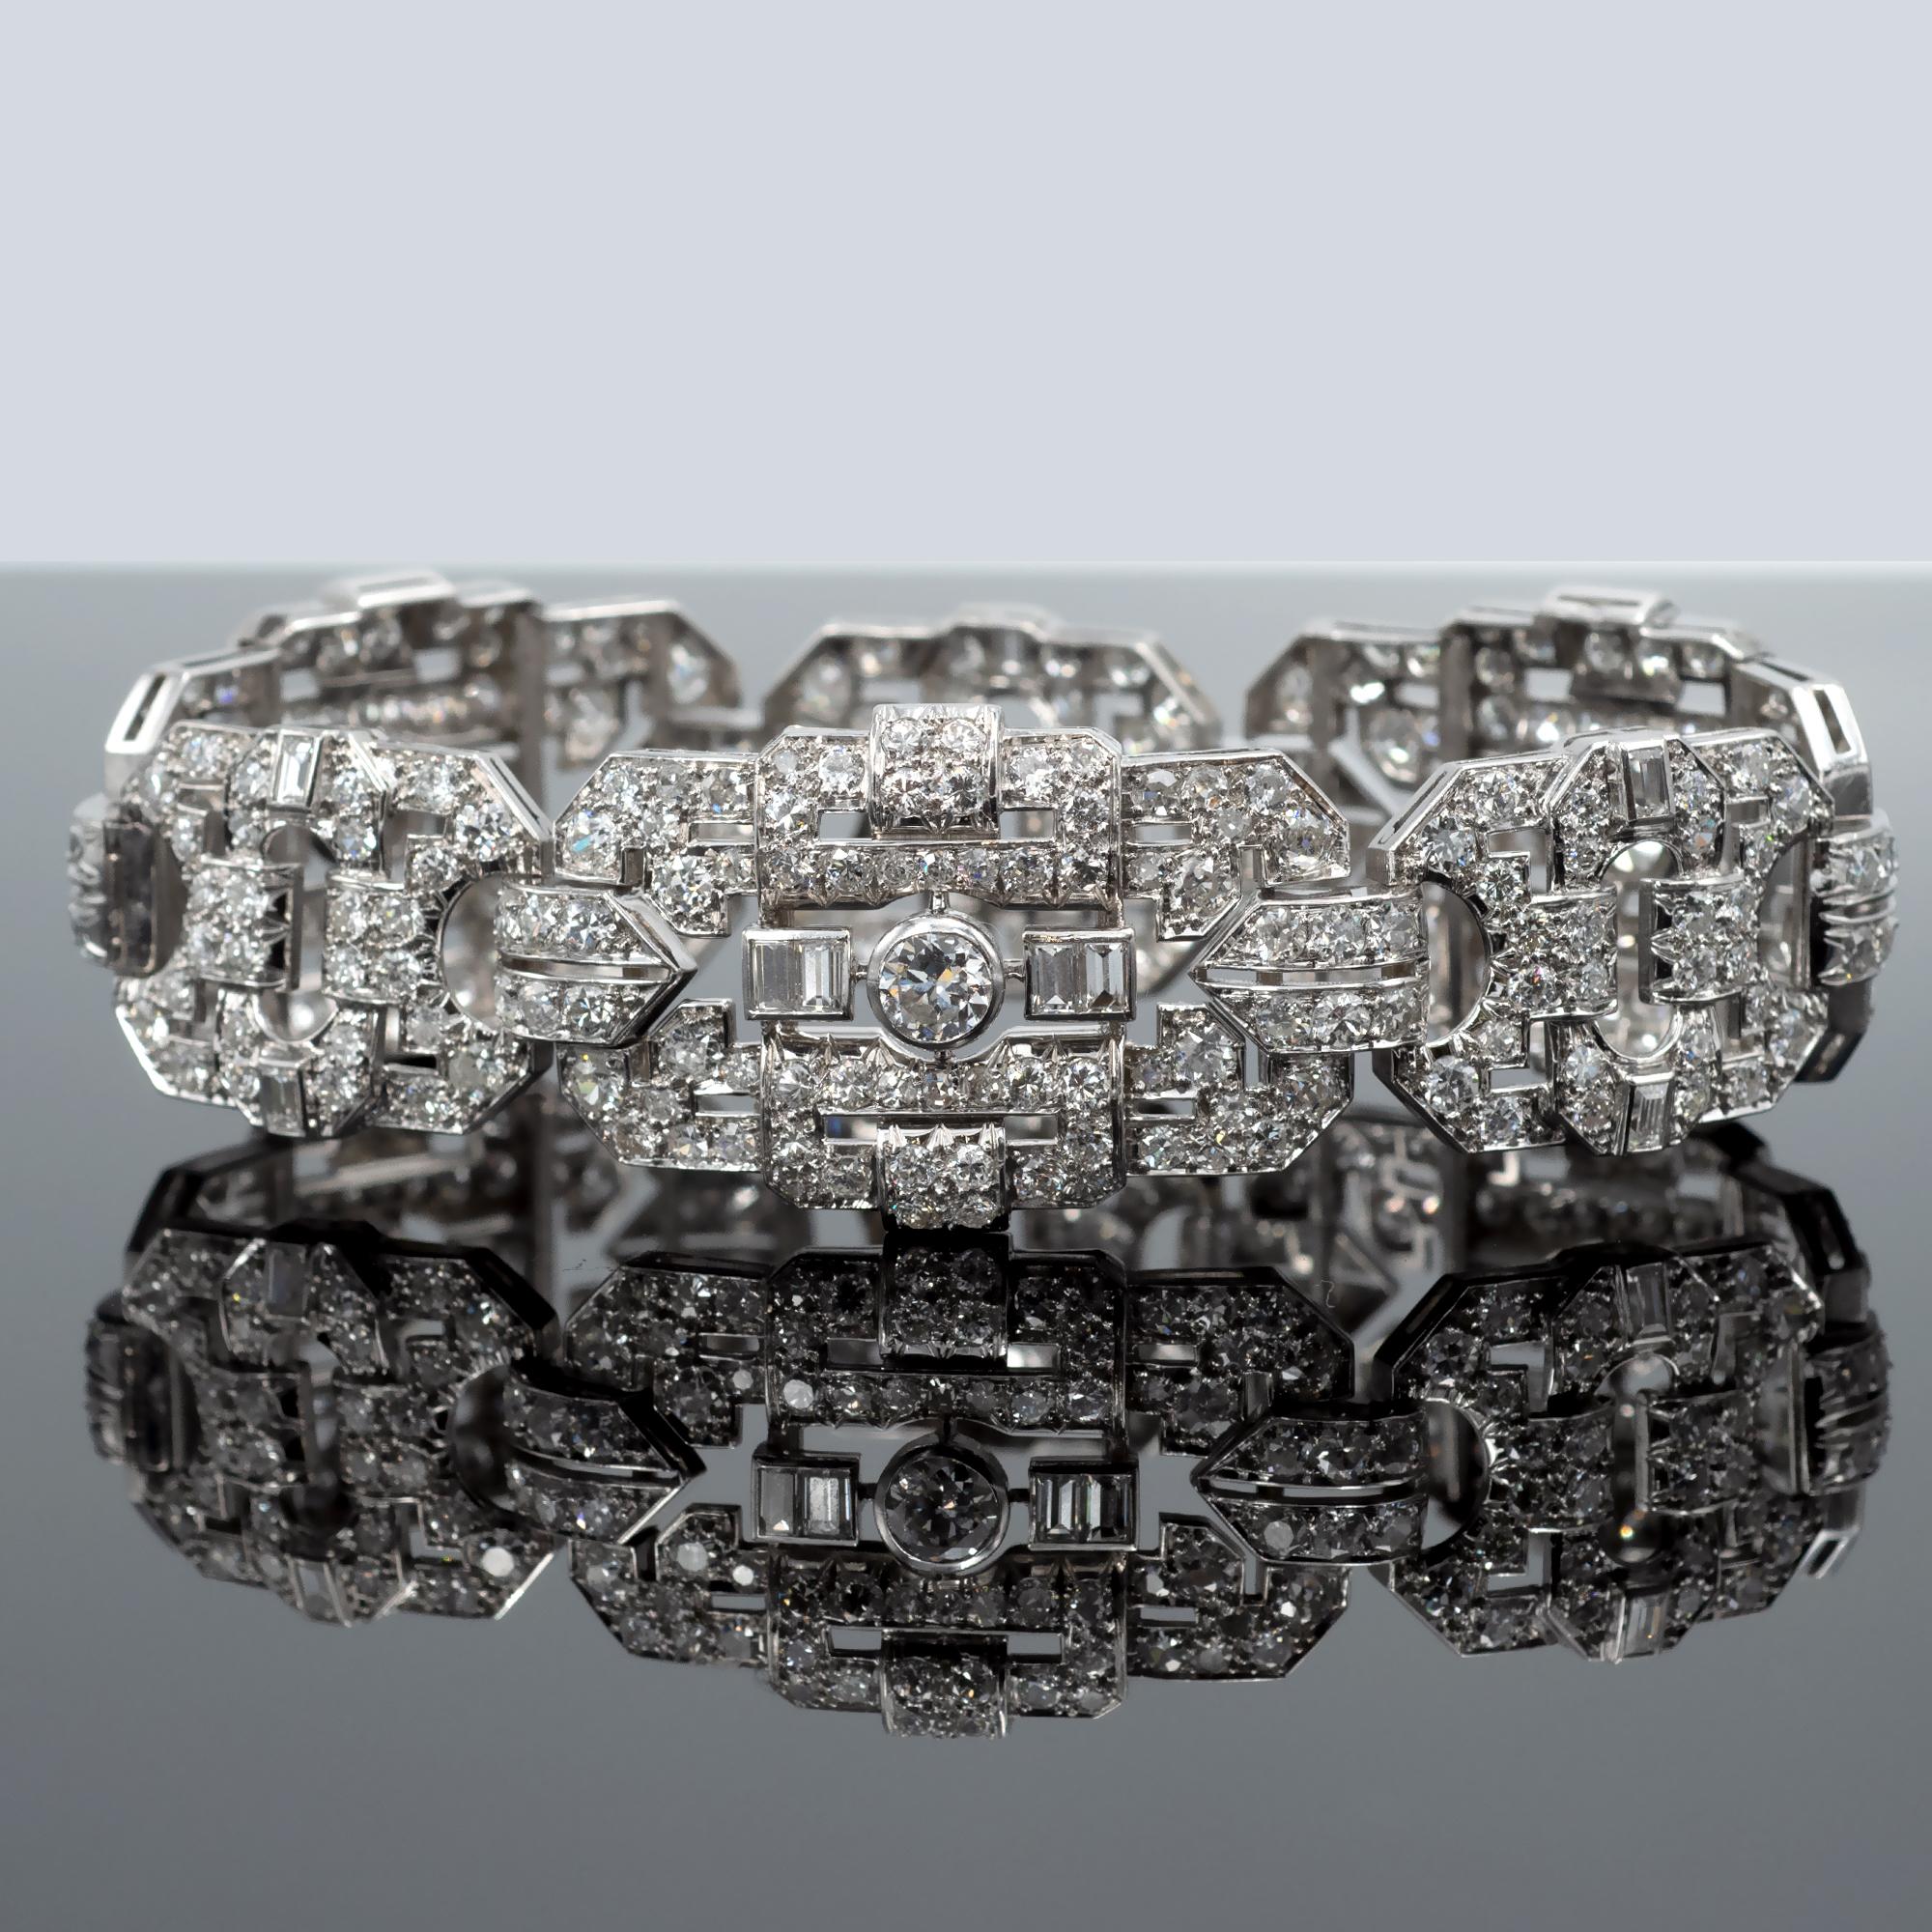 Exquisite diamond bracelet 23 mm wide expertly crafted in solid platinum displaying a stunning geometric open-work Art Deco pattern fully set with diamonds. The three prominent bezel-set, round old European cut diamonds weighing approximately 1.35